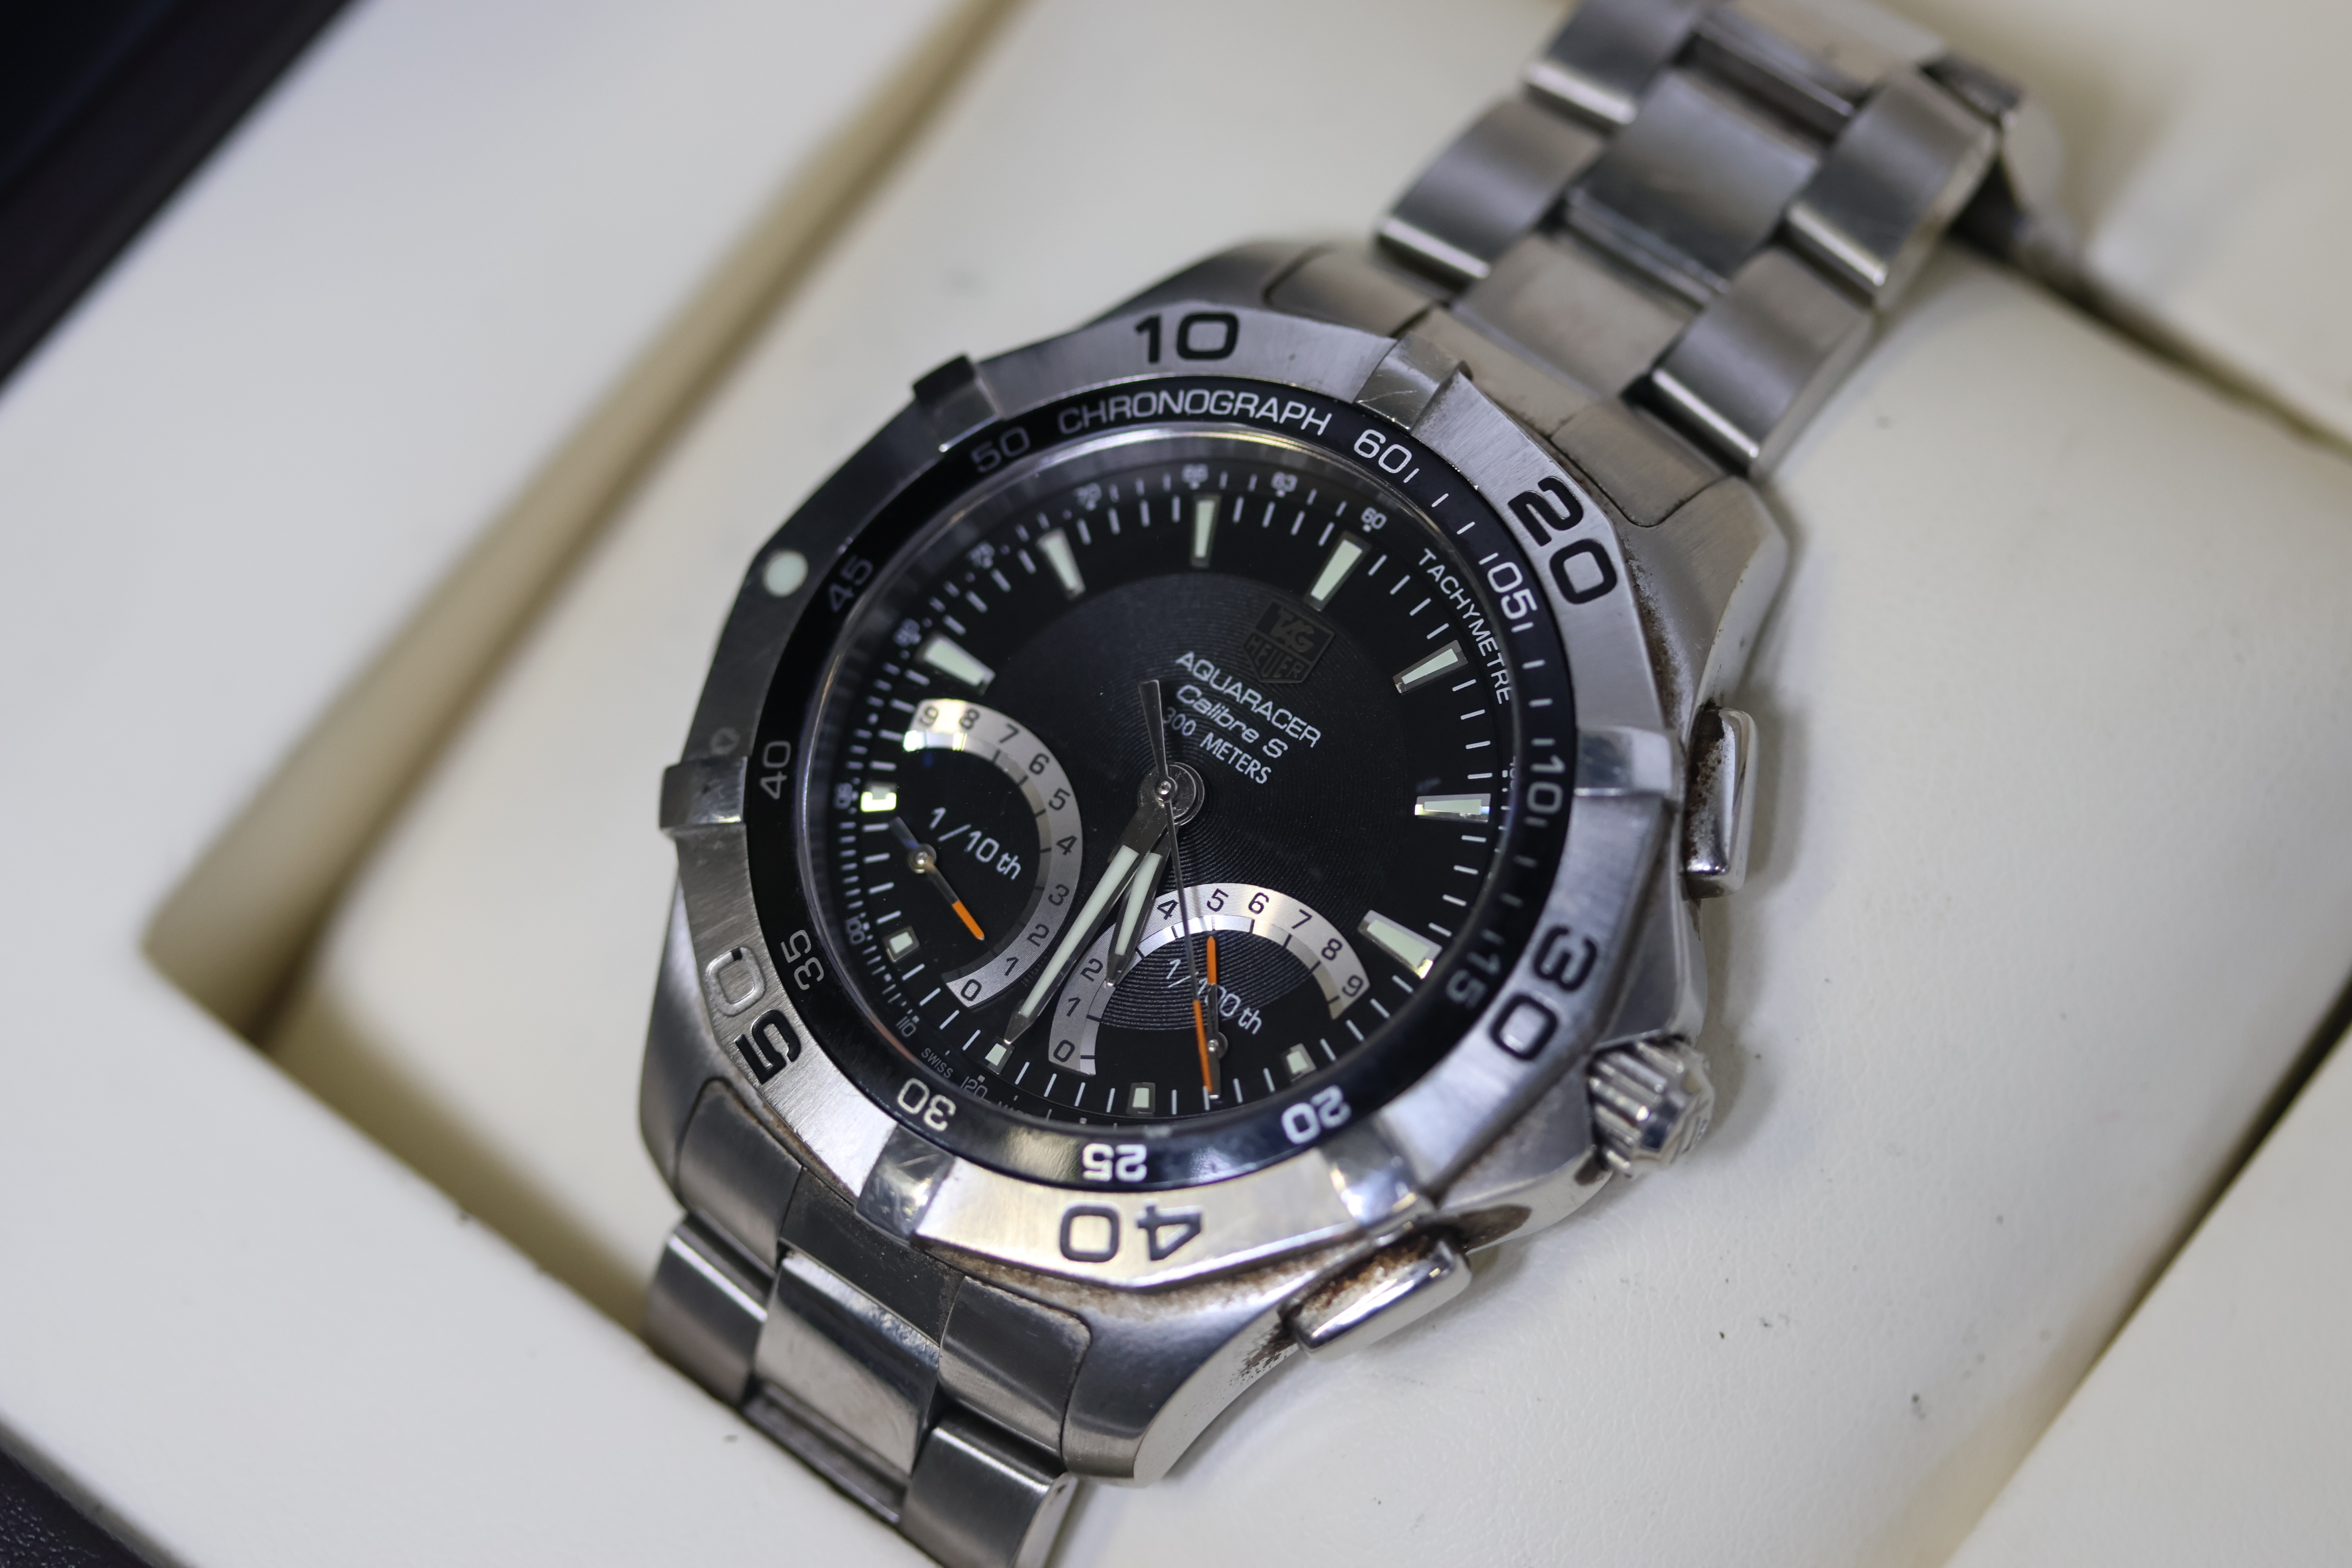 TAG HEUER AQUARACER CALIBRE S REFERENCE CAF7010 WITH BOX AND PAPERS 2014, black dial, chronograph to - Image 5 of 7